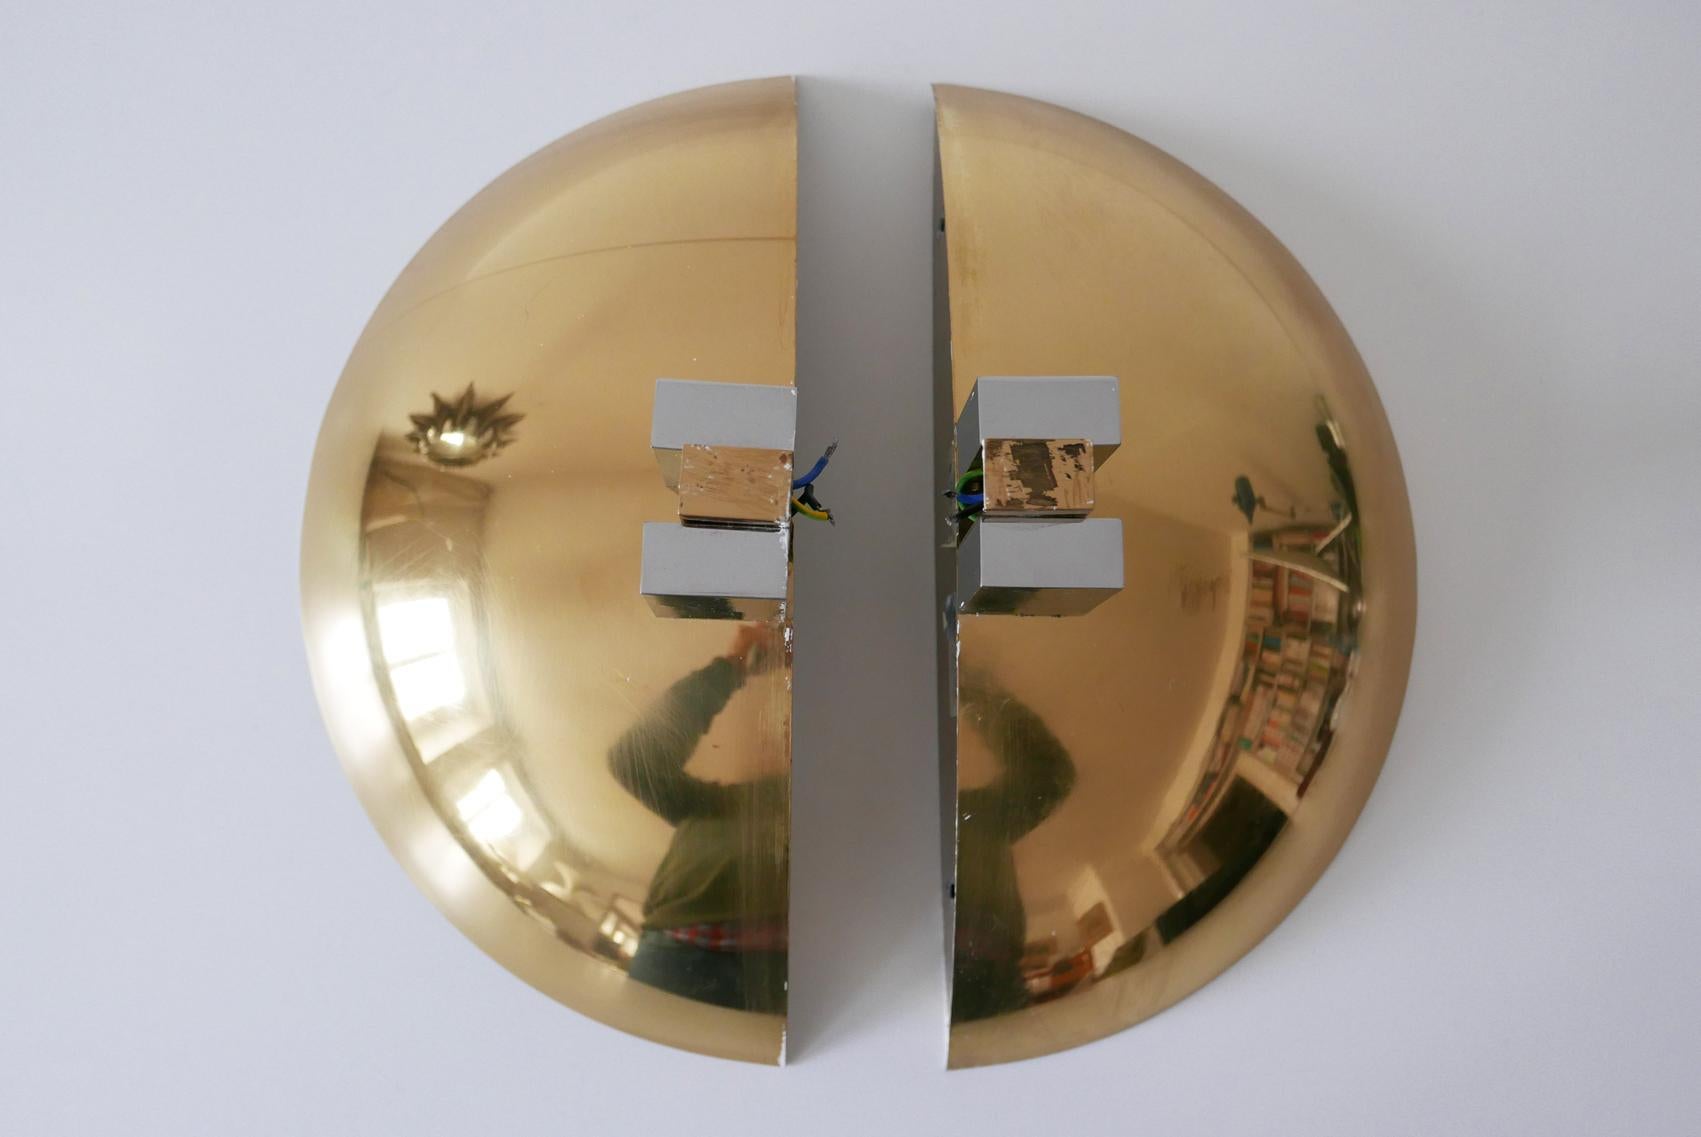 Set of Two Midcentury Brass Wall Lamps or Sconces by Art-Line, 1980s, Germany For Sale 4